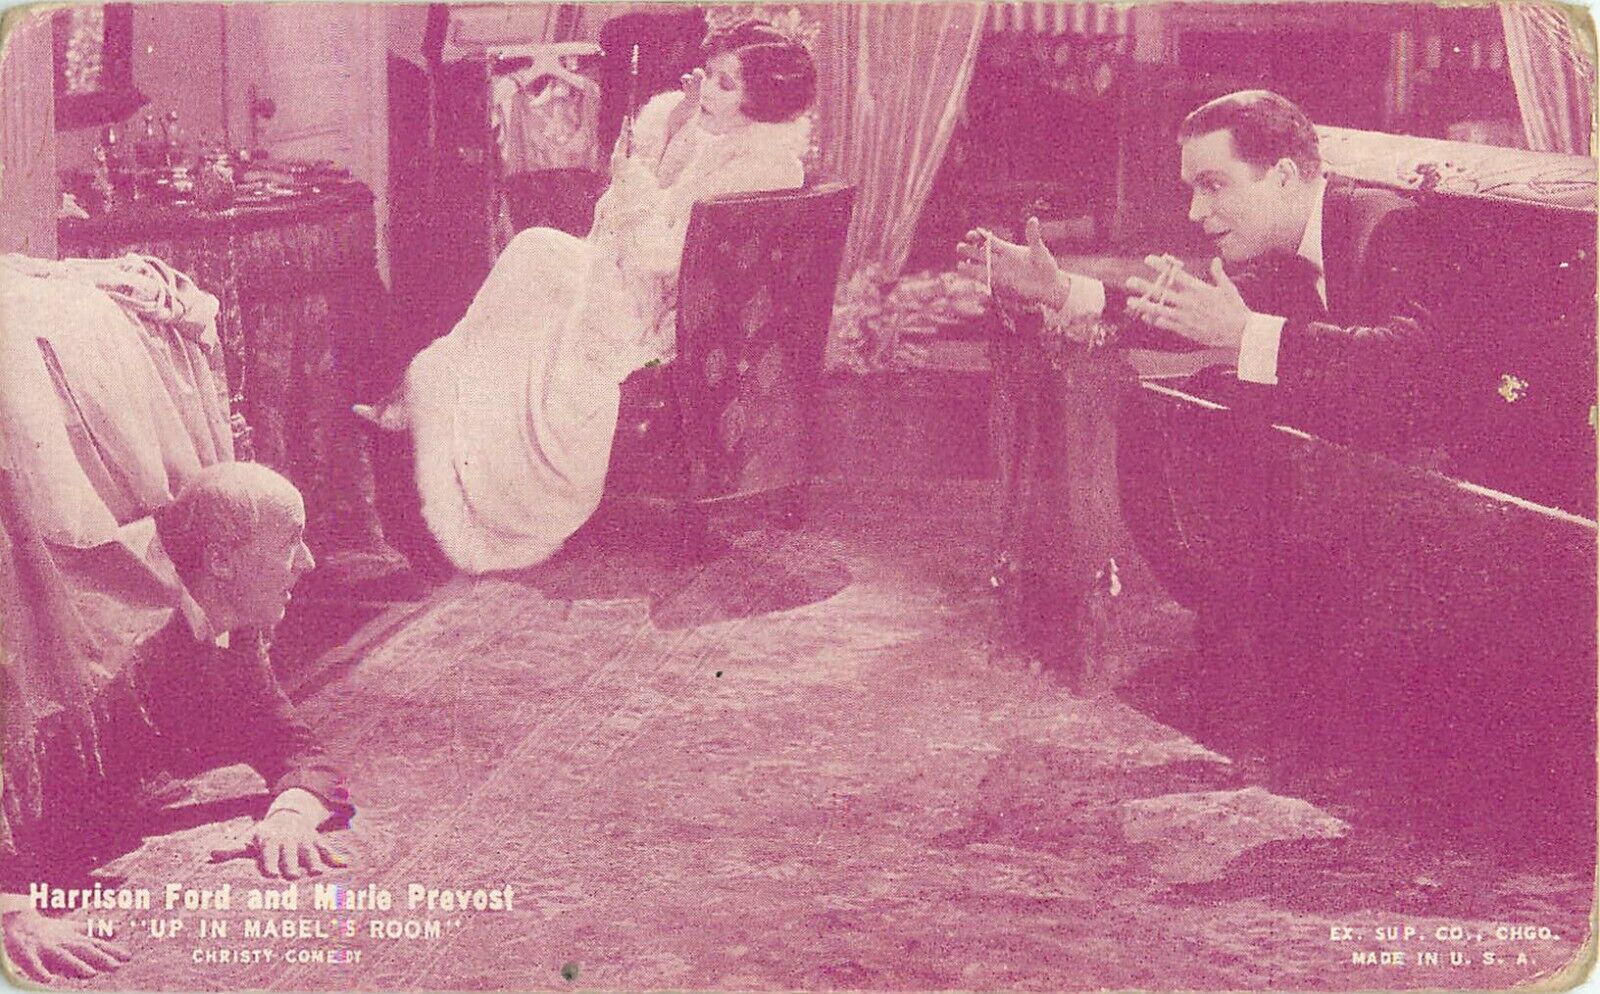 Marie Prevost Harrison Ford in 1926 Film Up in Mabel's Room Arcade Card Postcard